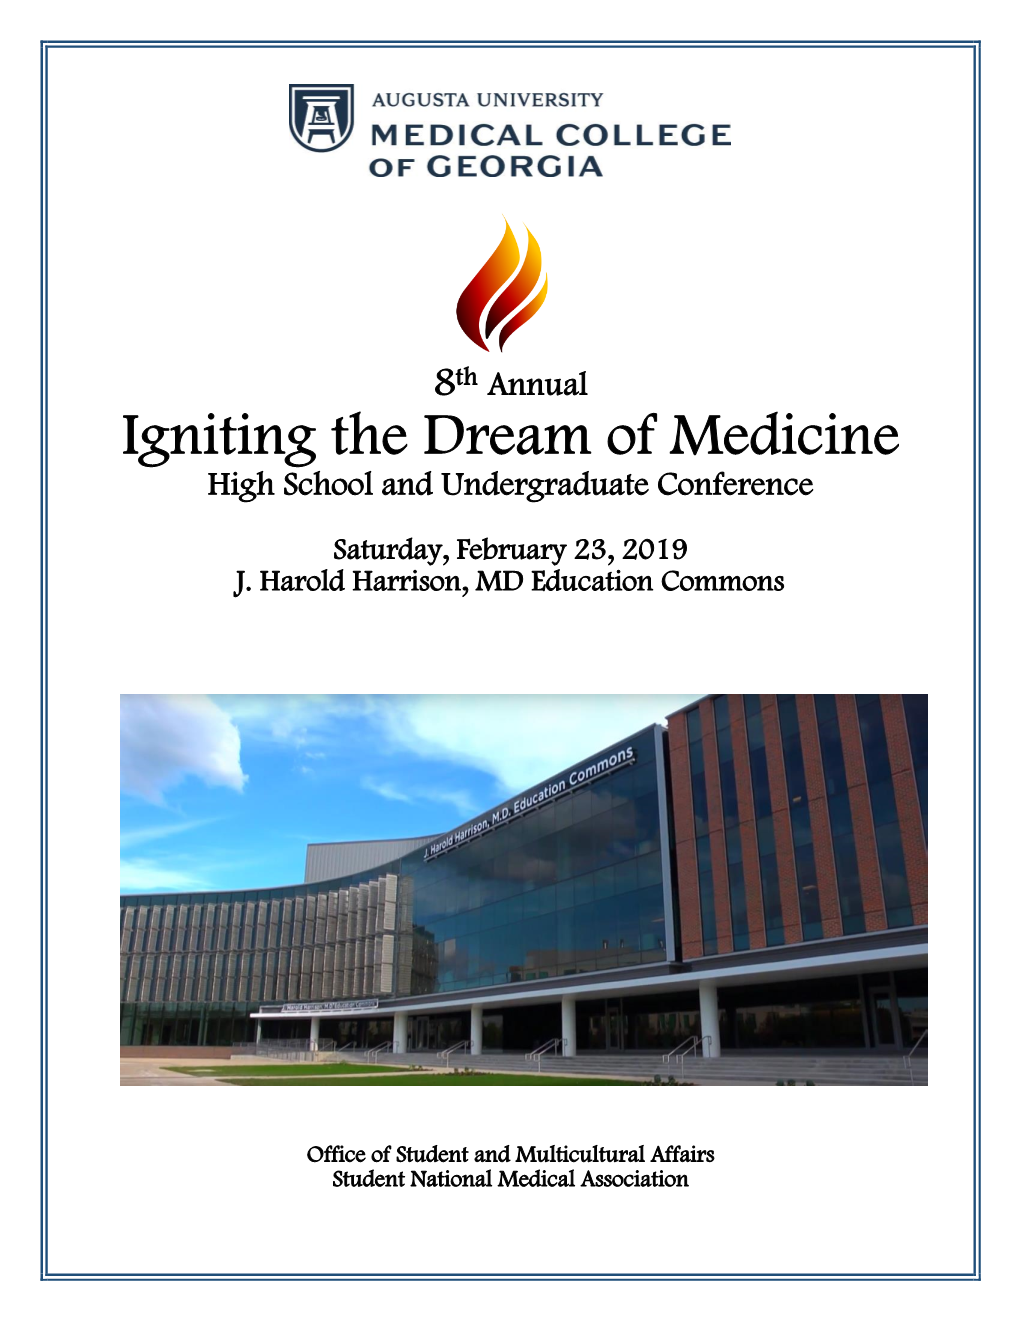 Igniting the Dream of Medicine High School and Undergraduate Conference